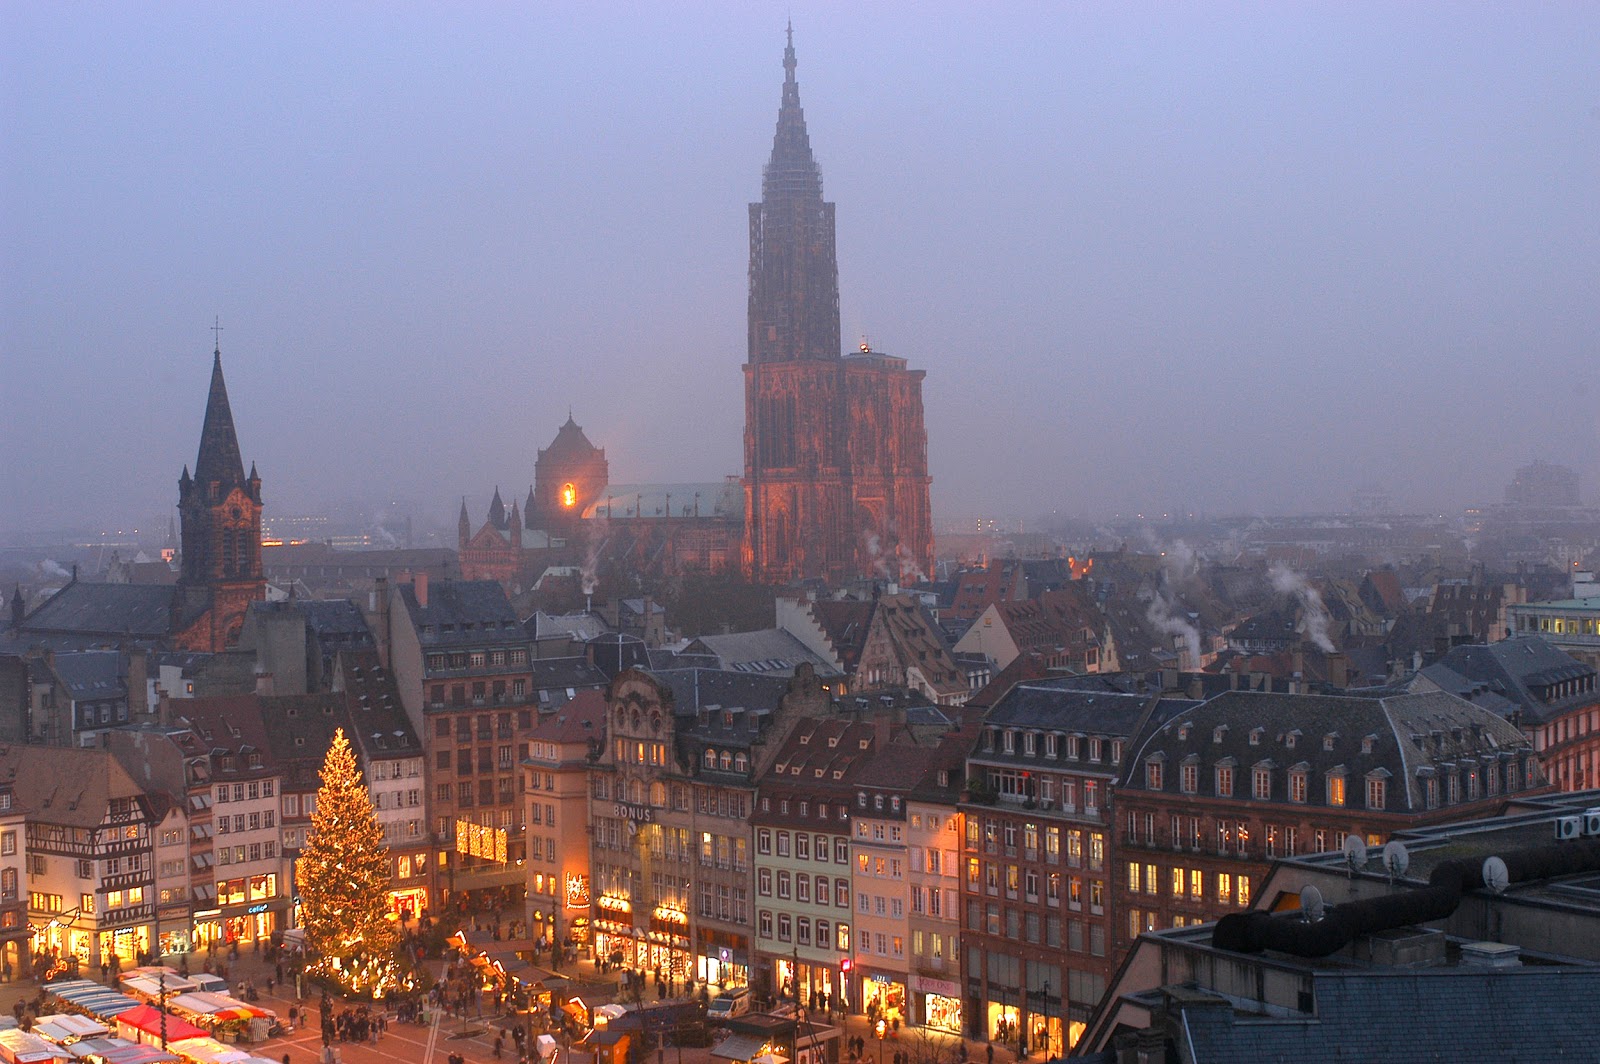 The Christmas market in Place Kléber in Strasbourg sparkles in a tapestry of Christmas lights in this dramatic aerial view of the square. © CRTA - Meyer.